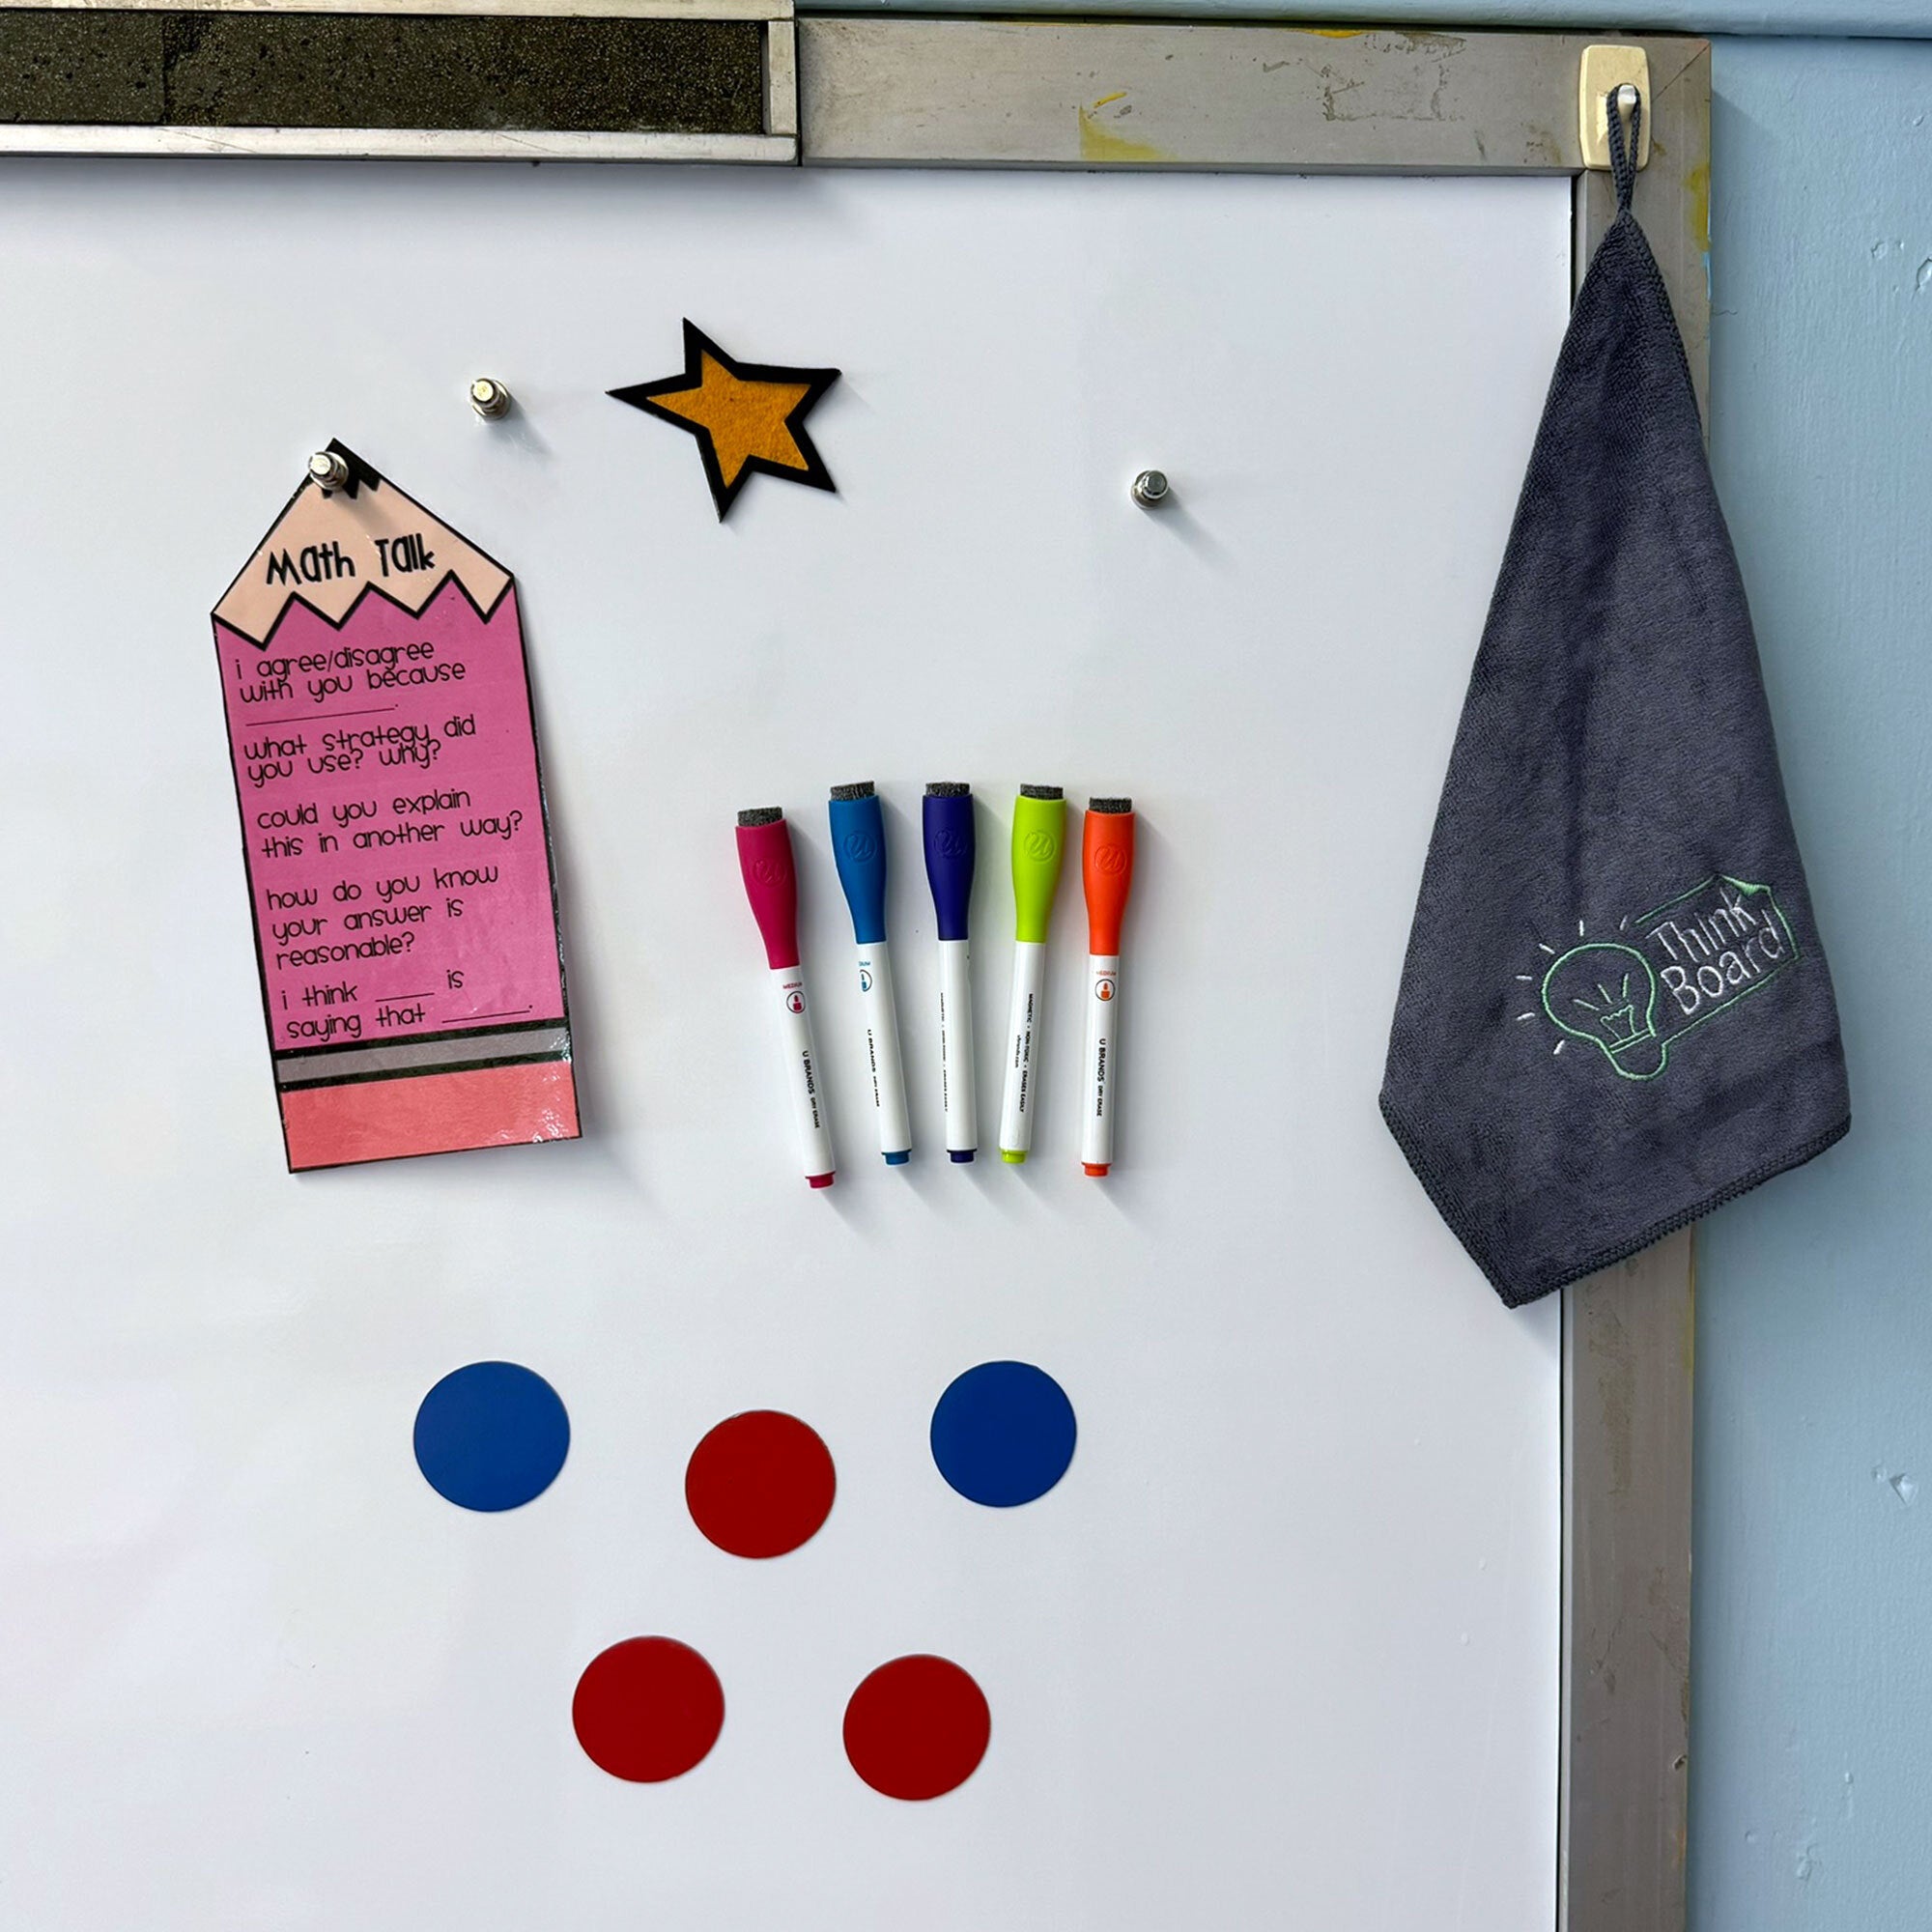 HOW TO MAKE AN EASY CUSTOM MAGNETIC BOARD, DIY HOME DECOR